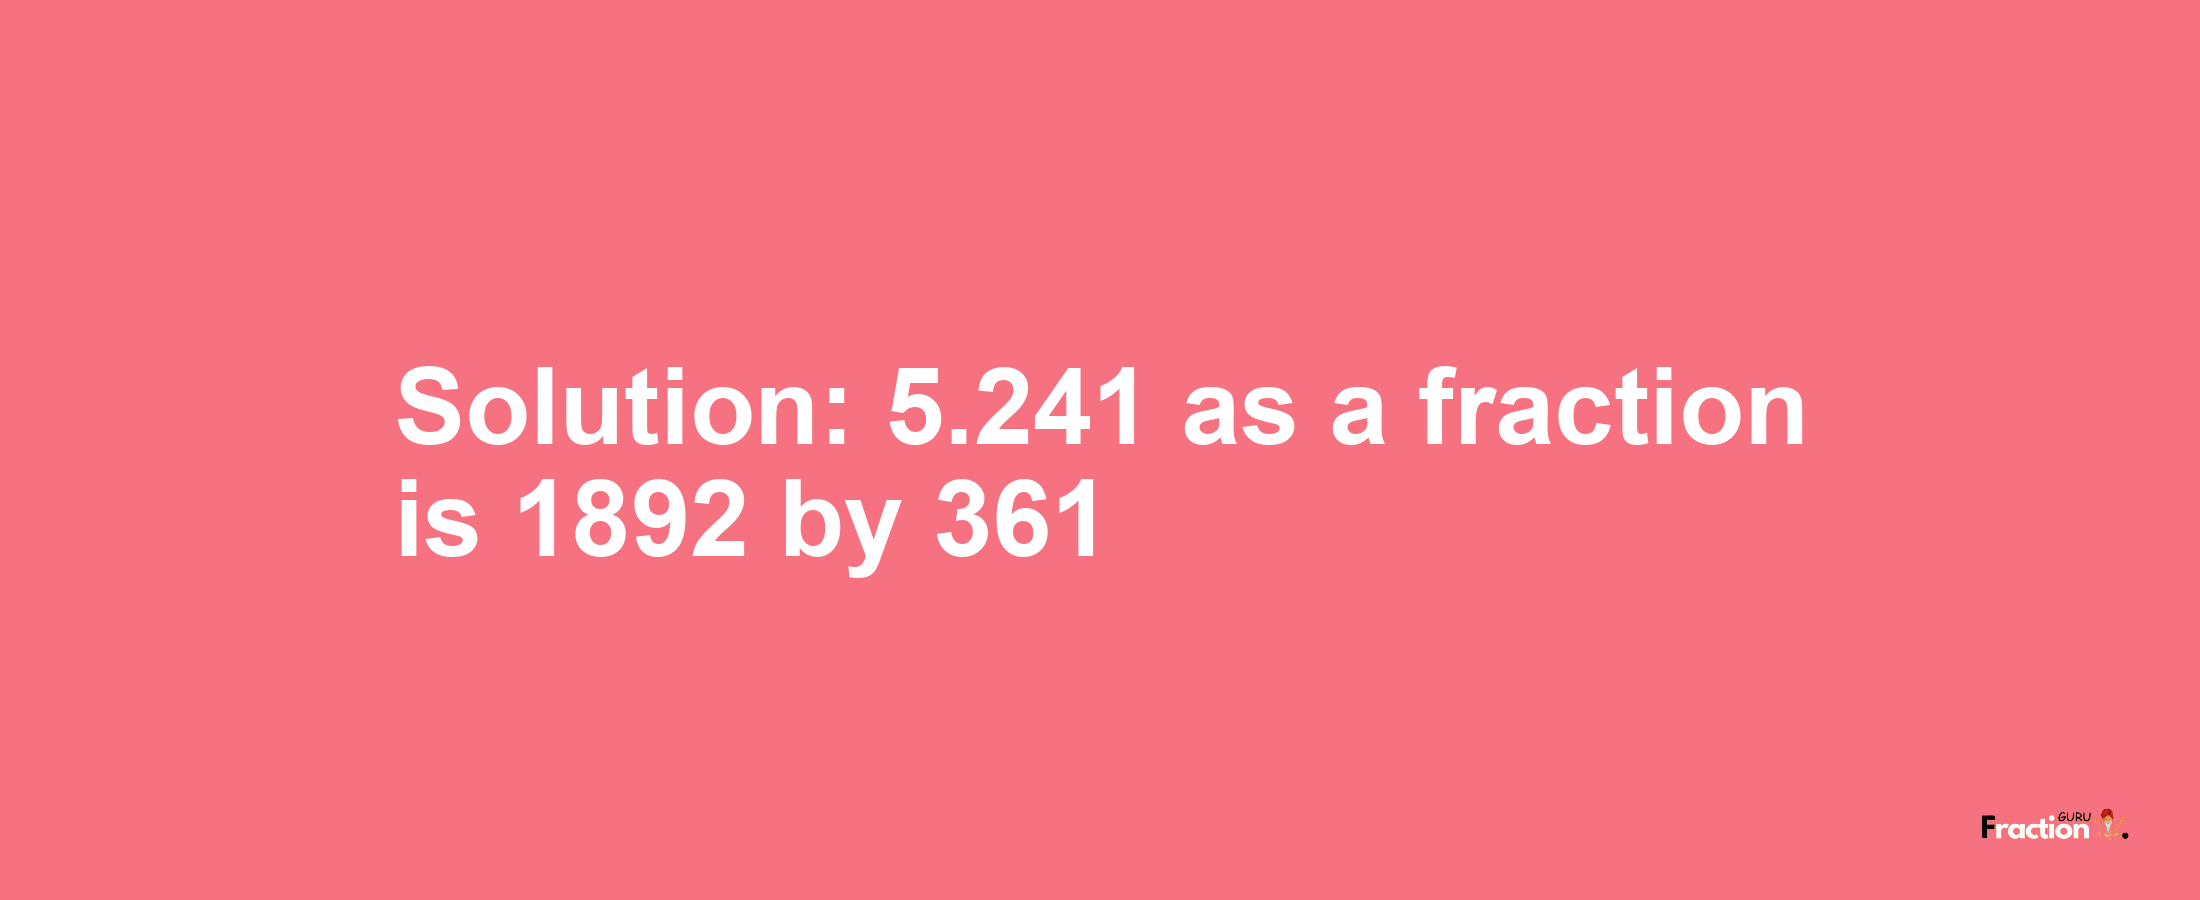 Solution:5.241 as a fraction is 1892/361